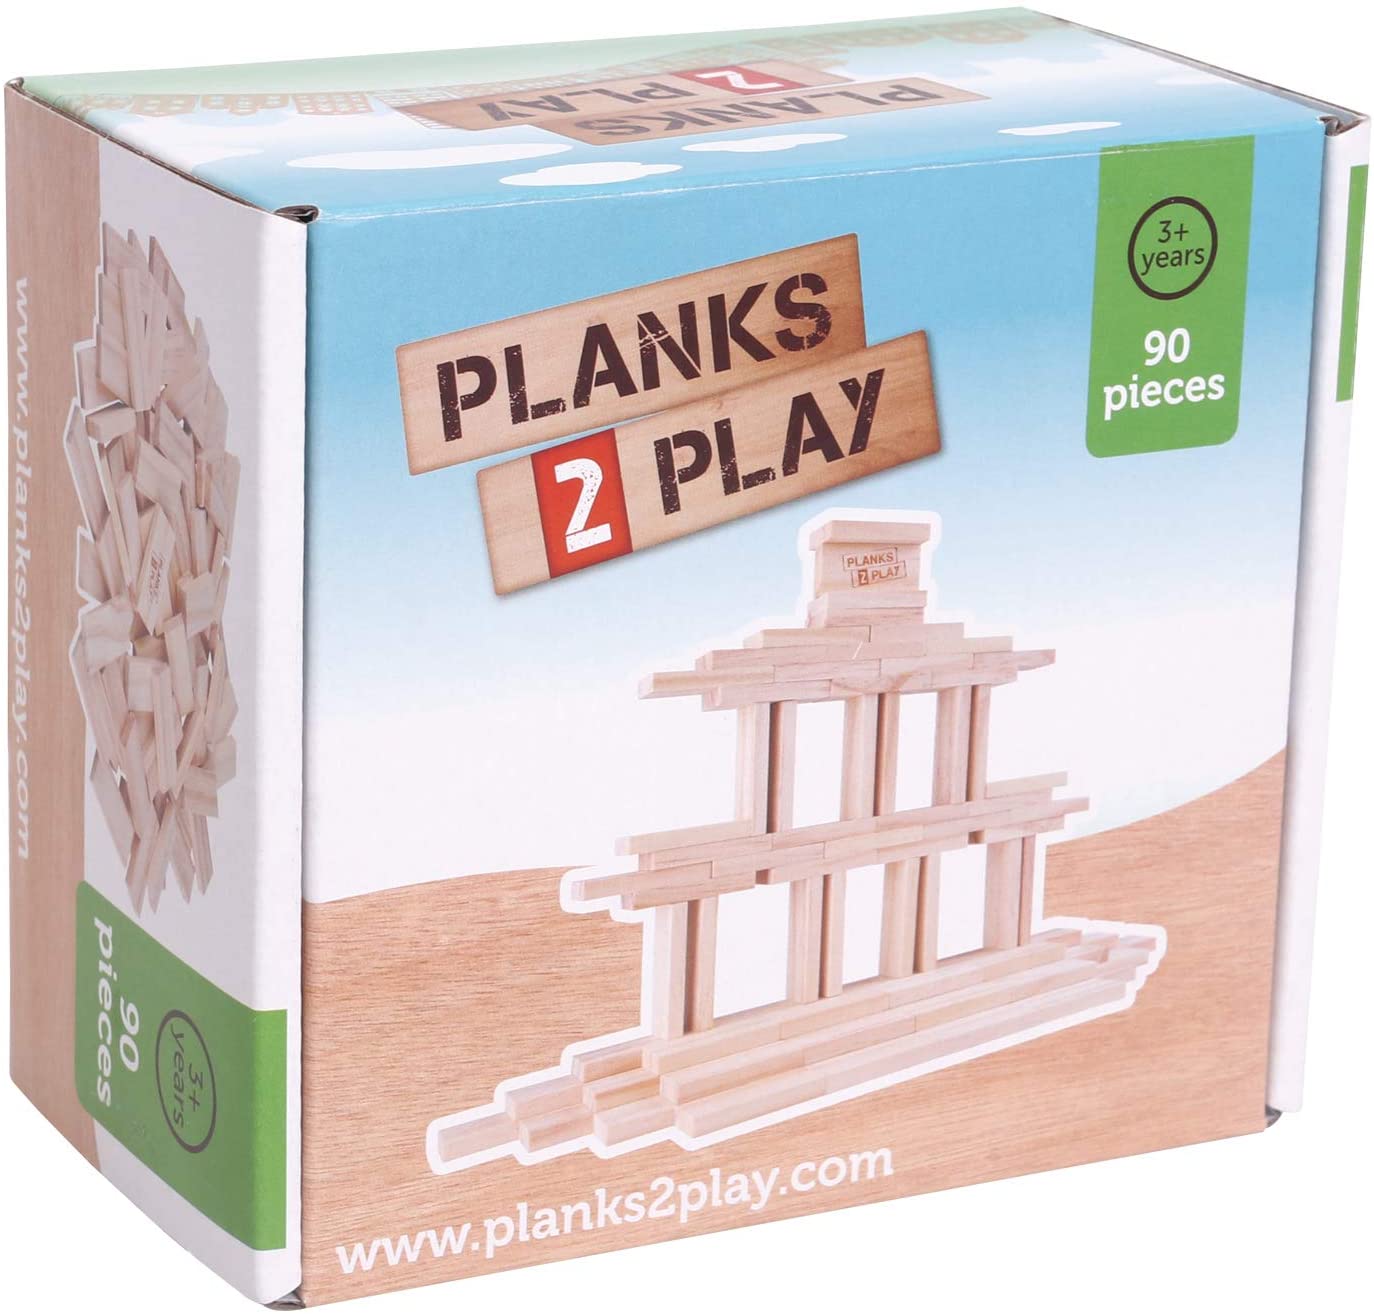 Planks 2 Play - 90 Small Wooden Boards